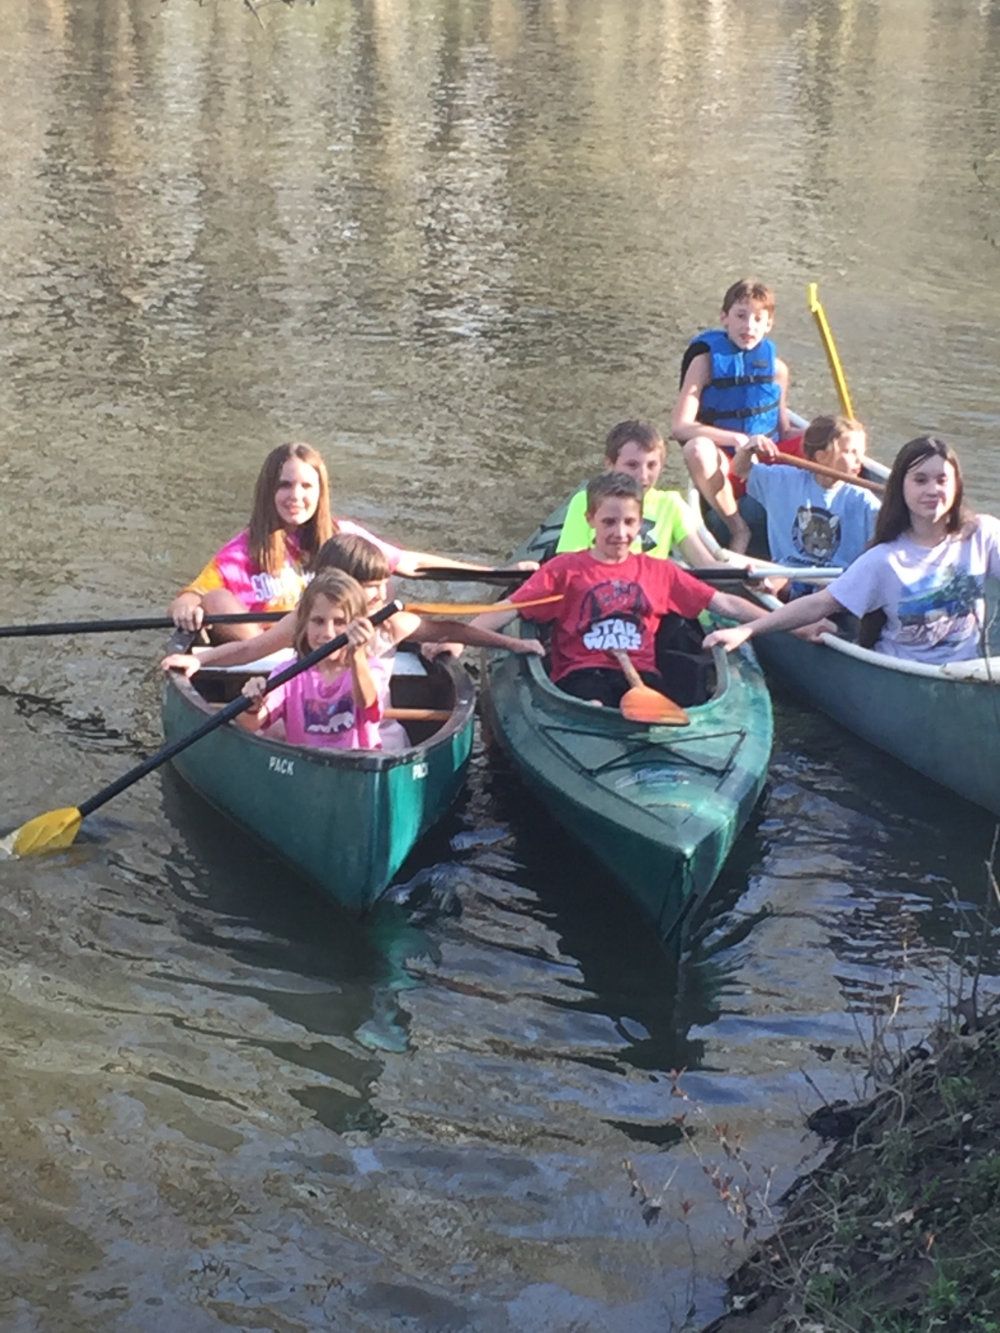 Kids pile into canoes to explore the Galien River.